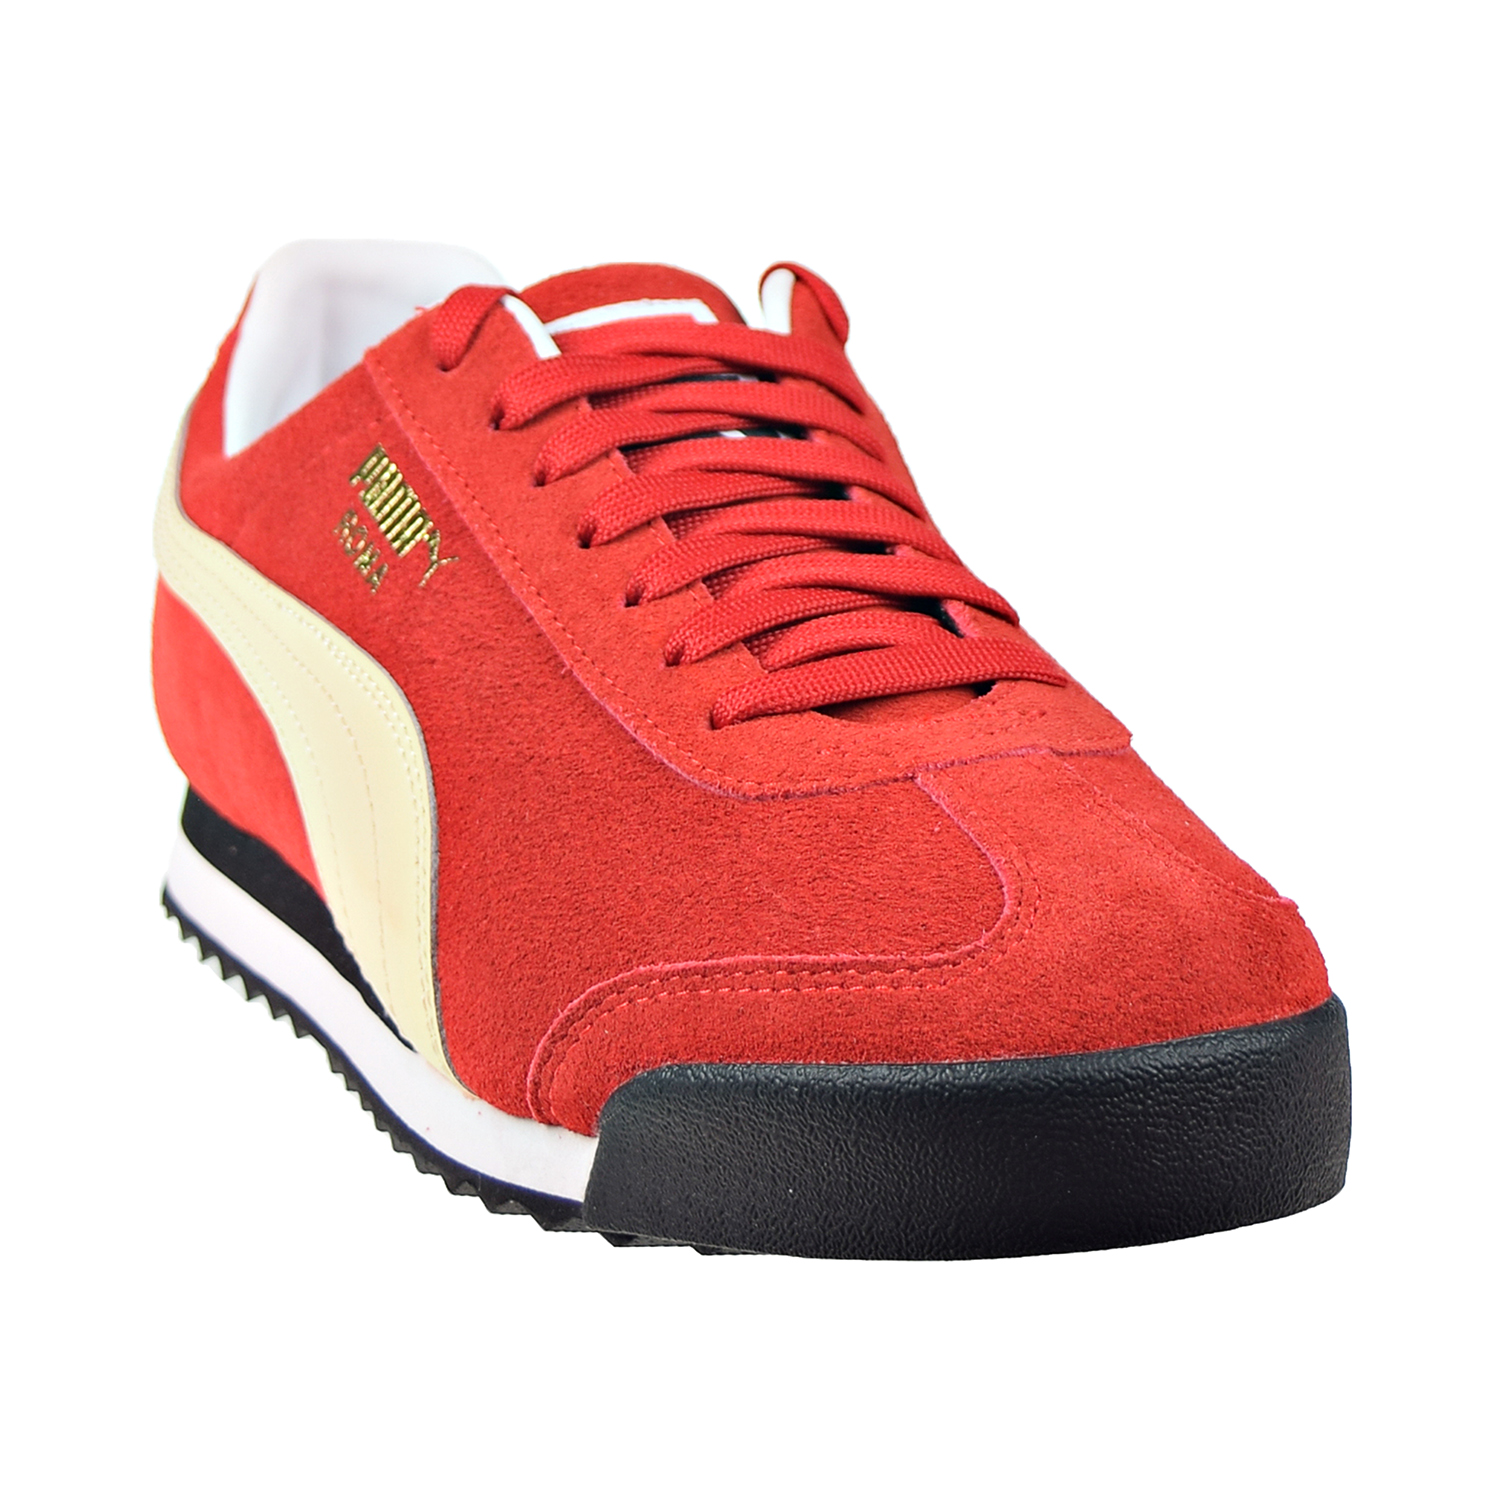 Puma Roma Suede Men's Shoes High Risk Red/Summer Melon 365437-13 - image 2 of 6